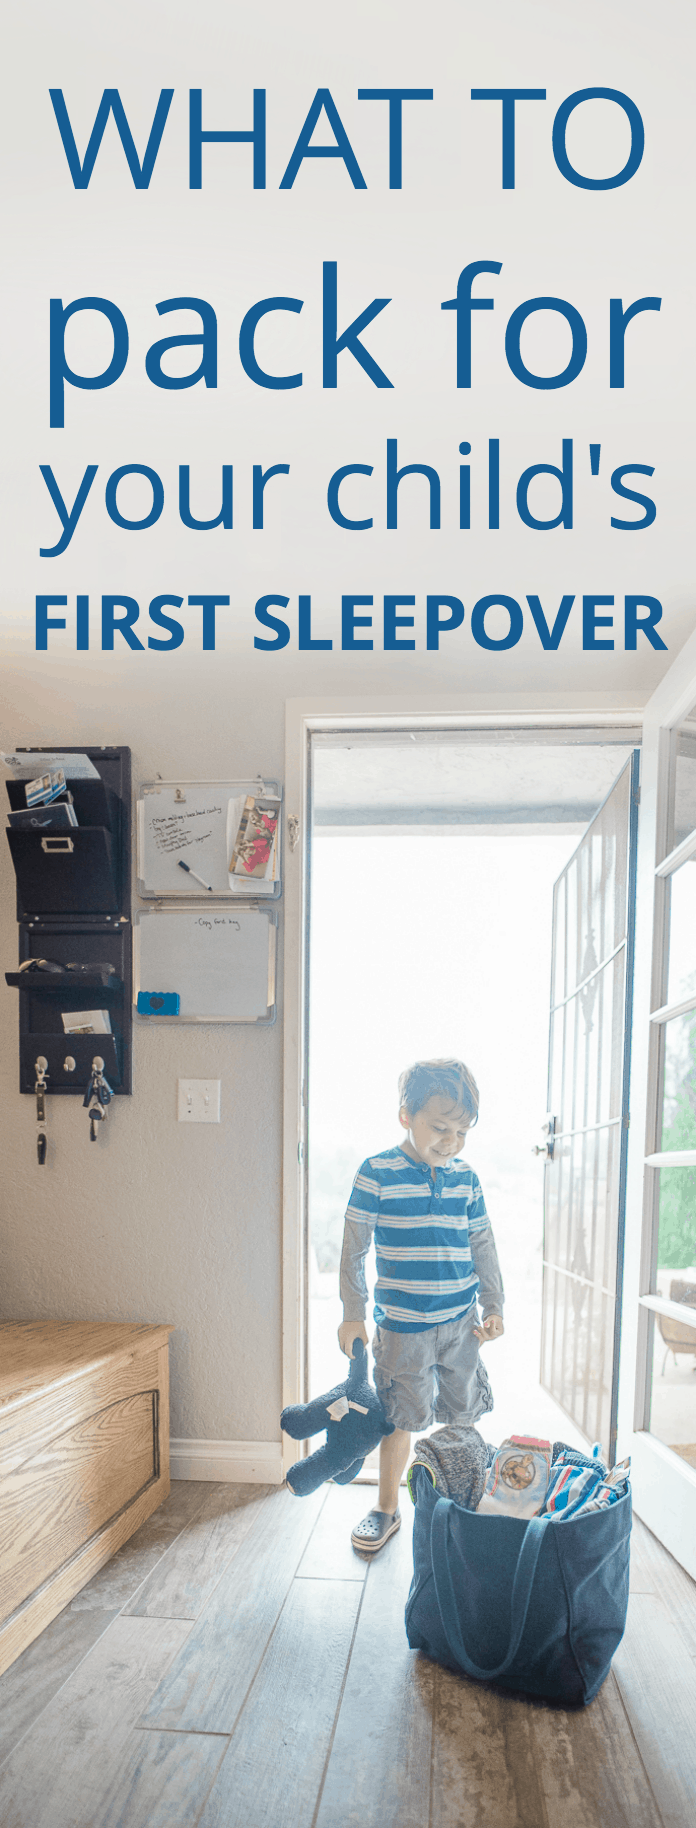 What to pack for your child's first sleepover